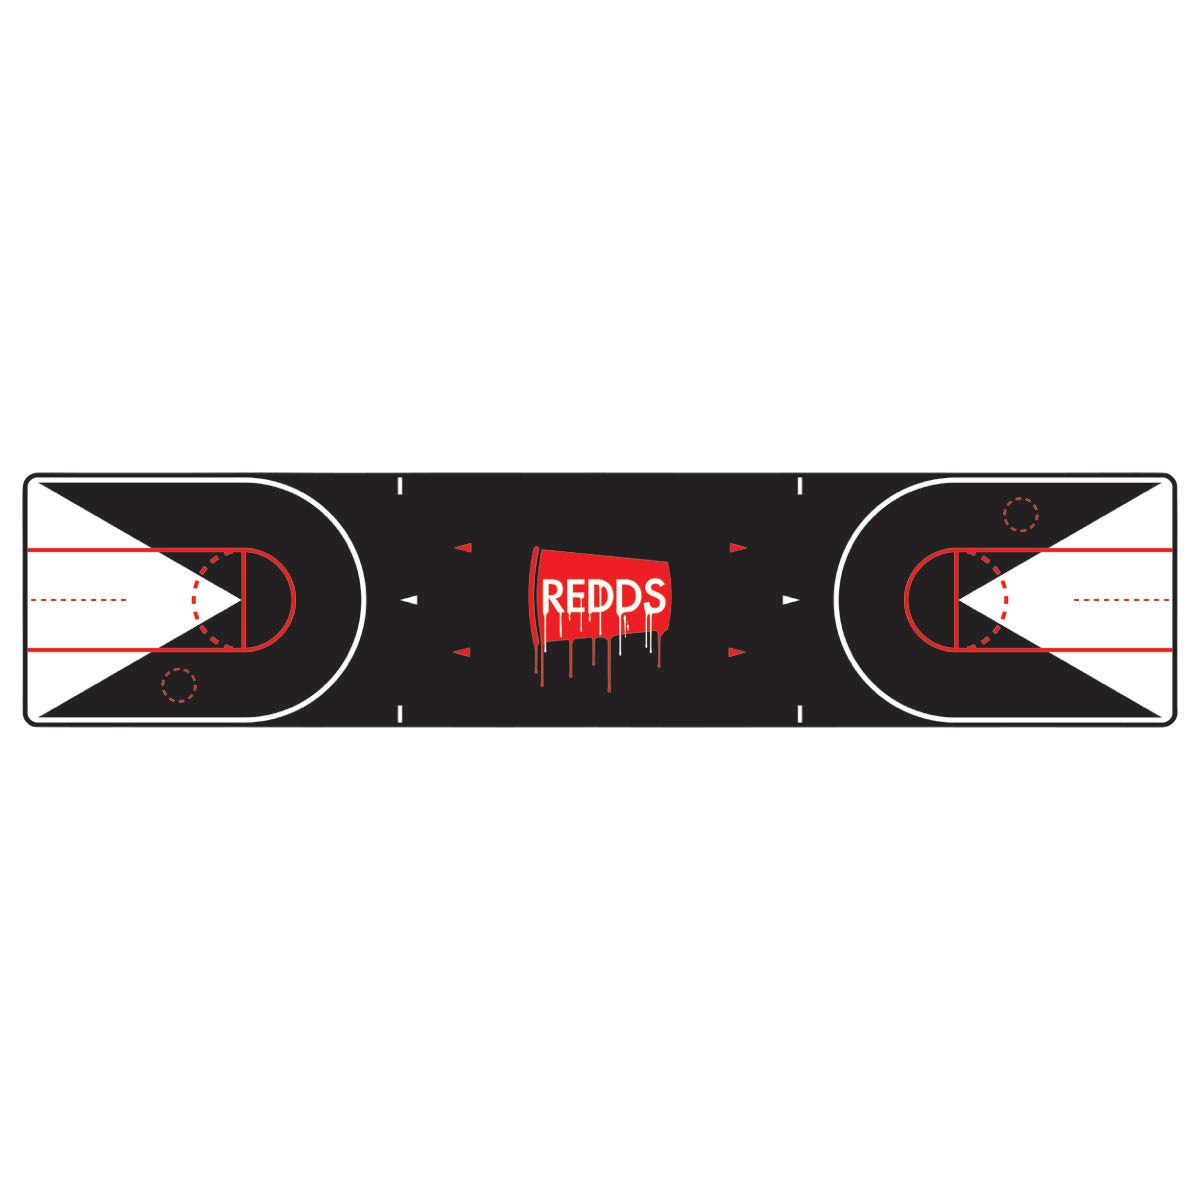 RCBPTBK1-1 Redds Redds Beer Pong Table 2400x600x700mm Tomkin Australia Hospitality Supplies